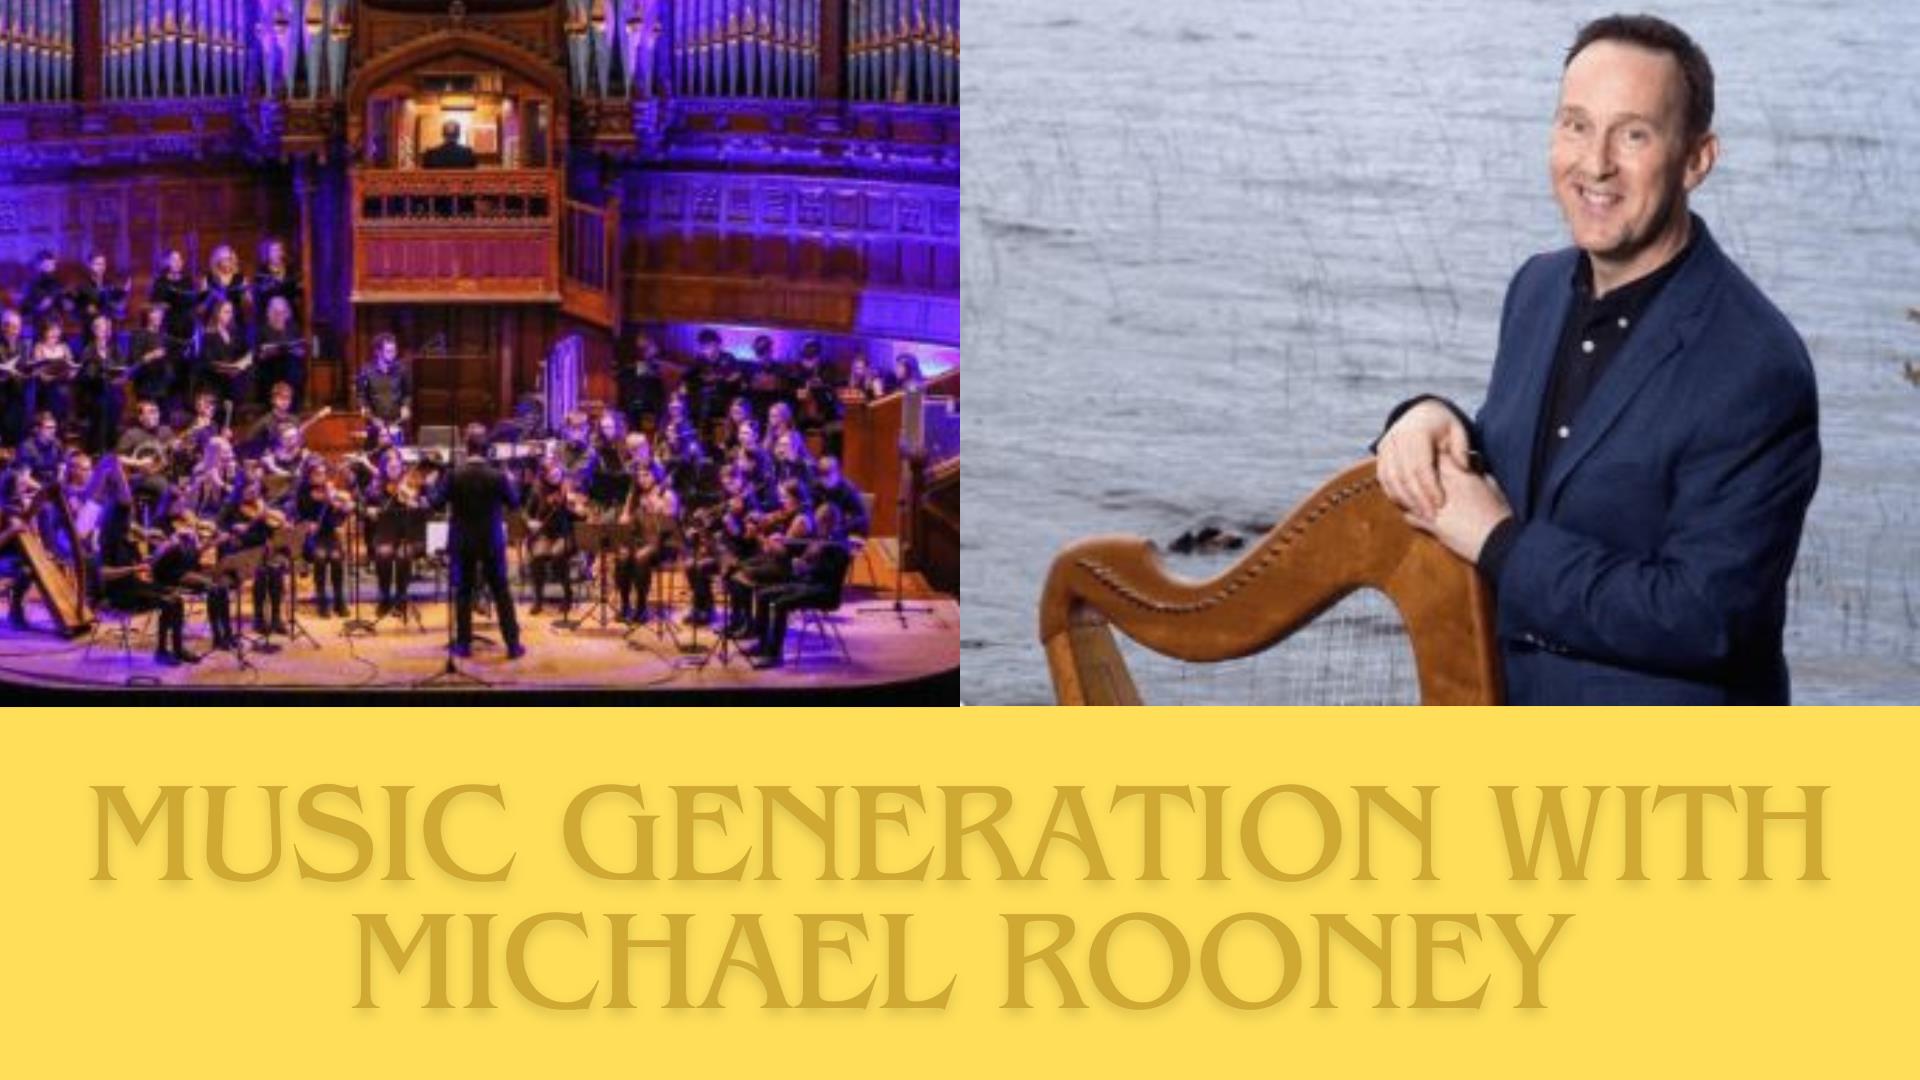 Promo for A DEEP RAVINE (MICHAEL ROONEY & MUSIC GENERATION CAVAN / MONAGHAN CROSS BORDER YOUTH ORCHESTRA) event taking place on 4 February 2024 in Der